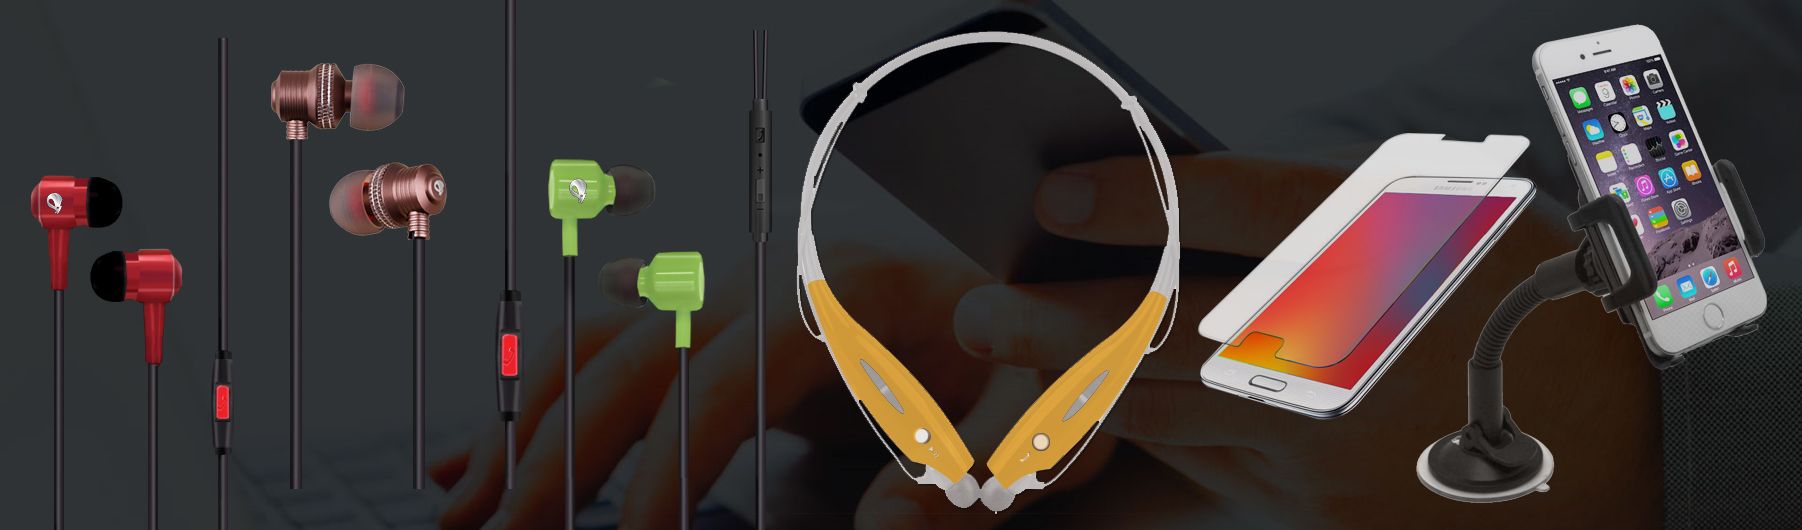 Spider USA – Best Earbuds You Ever Owned